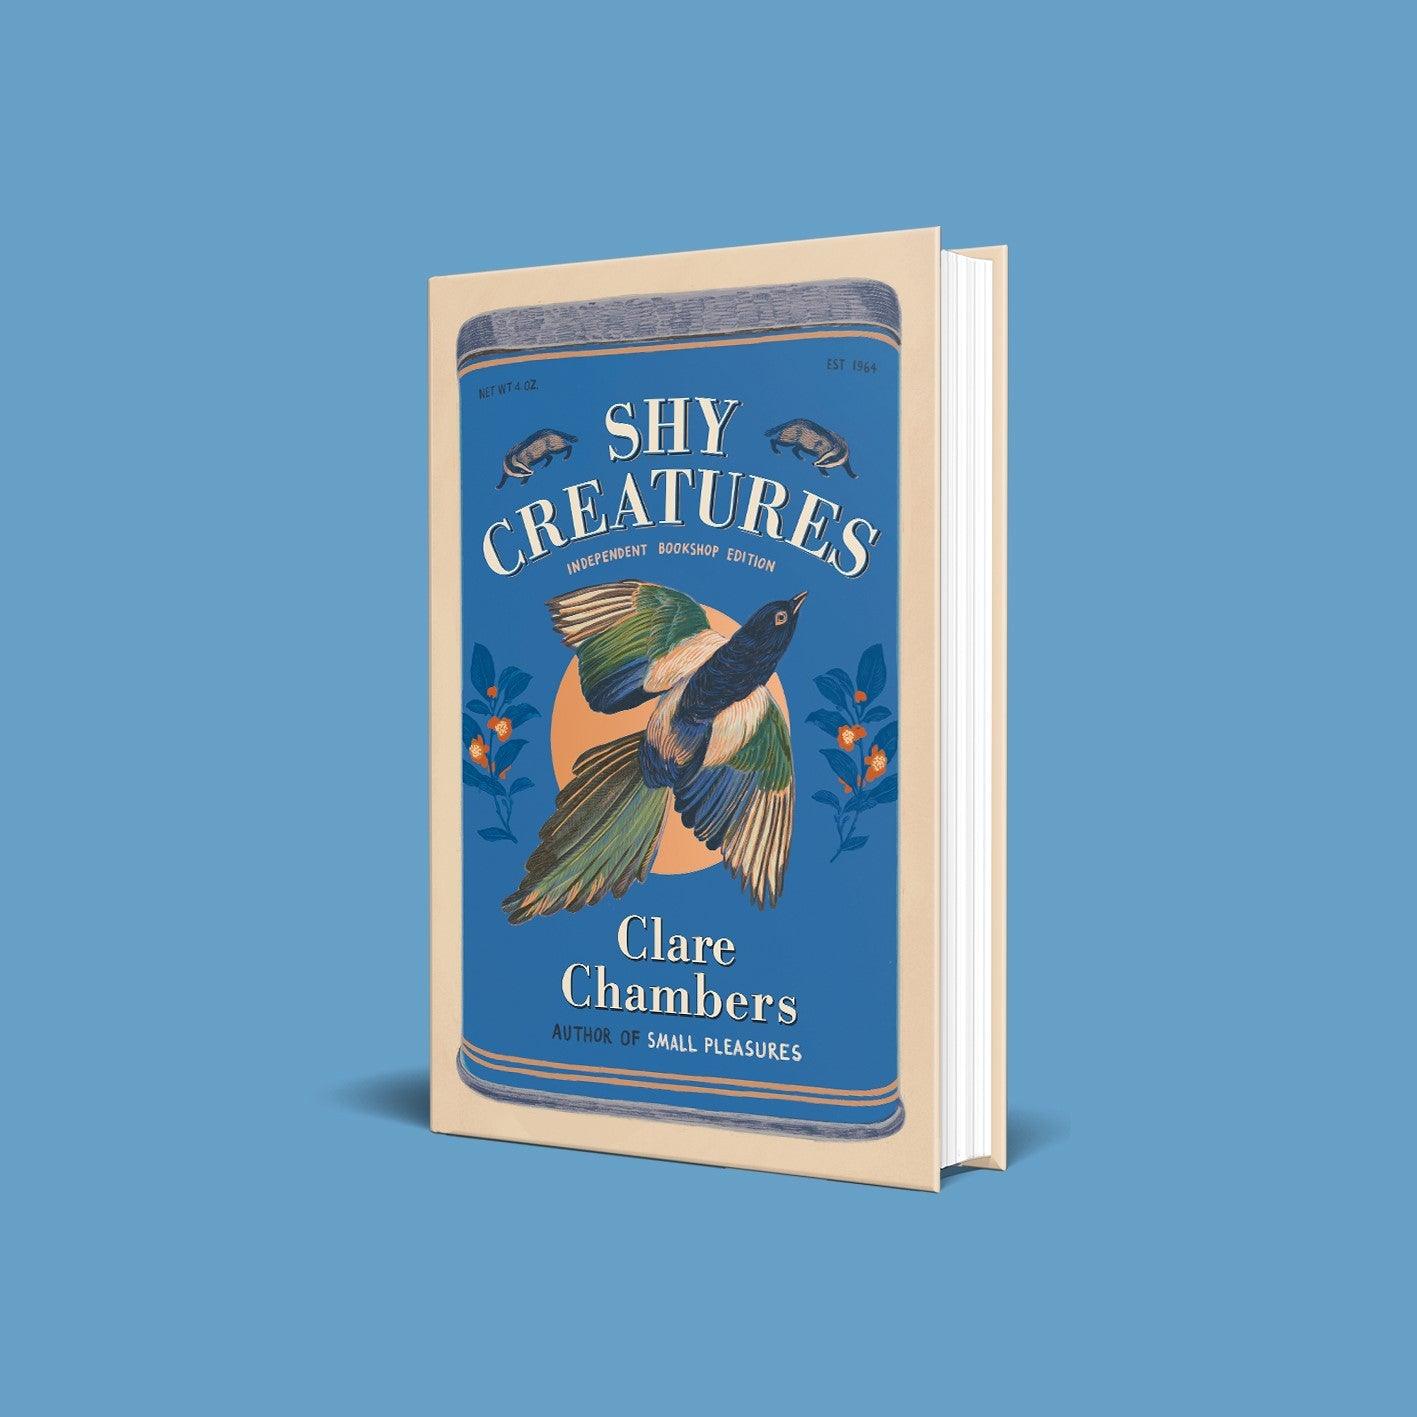 'Shy Creatures' by Clare Chambers - Signed Limited Edition - Pub. August 29th - The Cleeve Bookshop